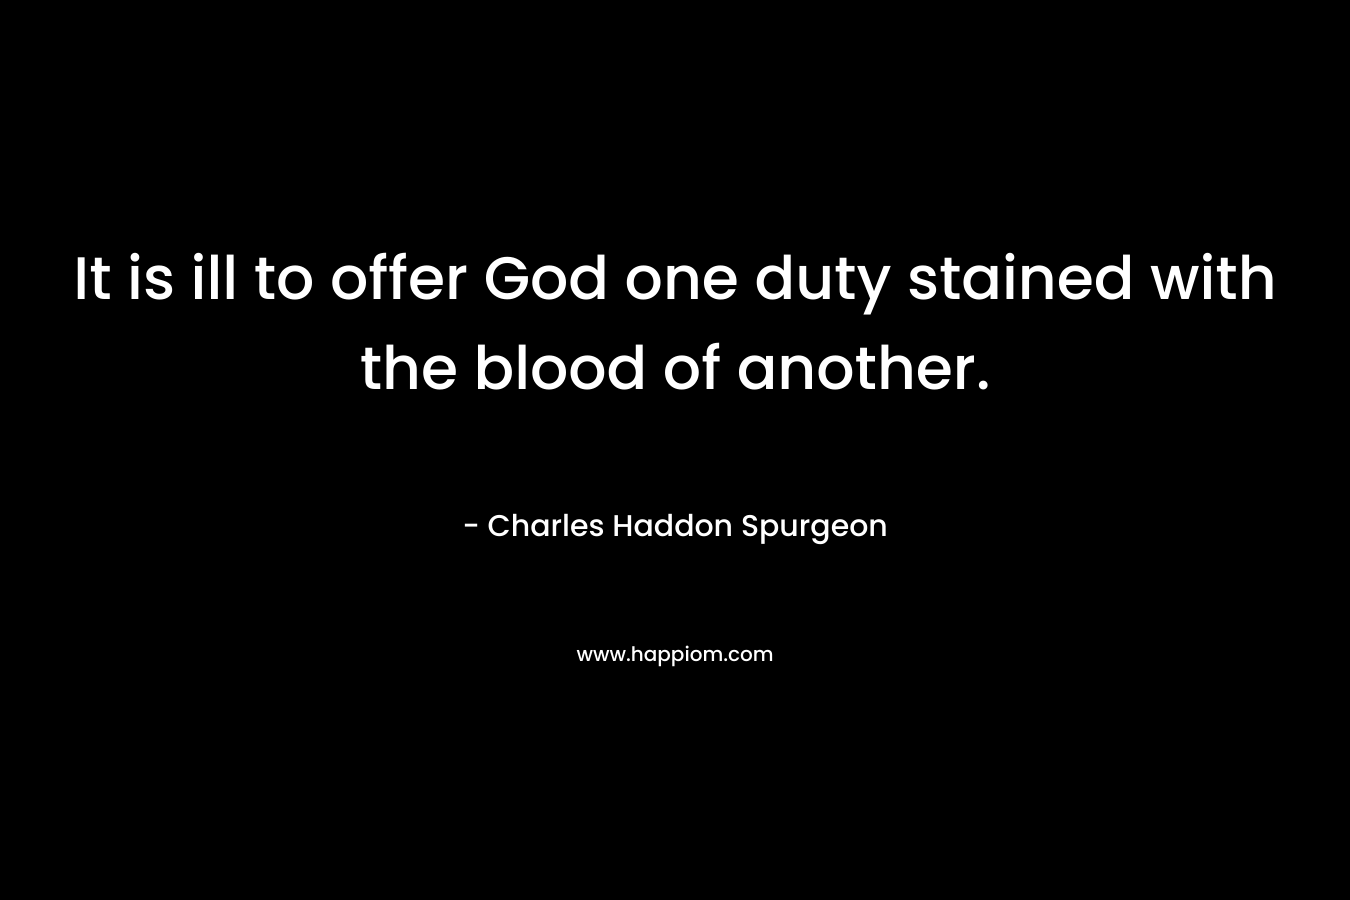 It is ill to offer God one duty stained with the blood of another. – Charles Haddon Spurgeon